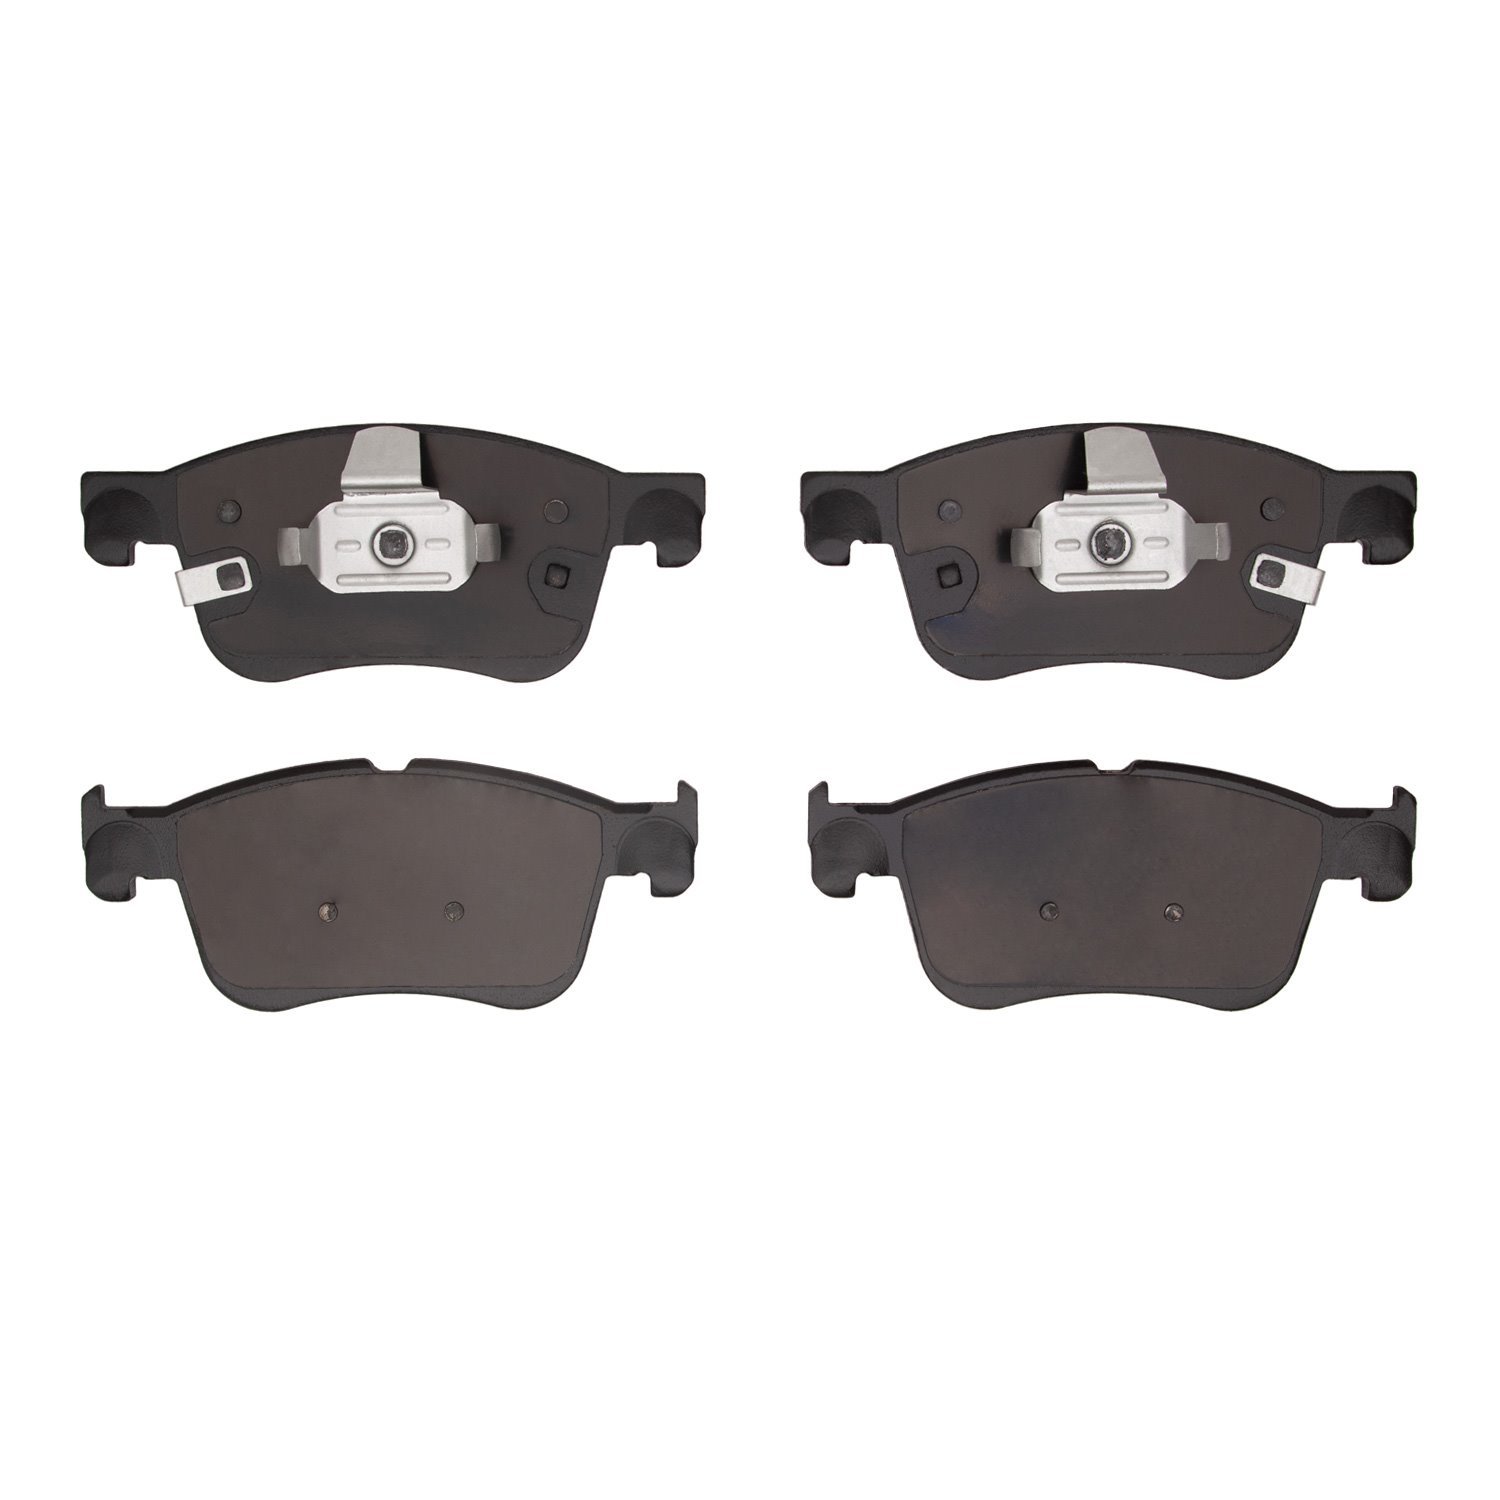 1310-2300-00 3000-Series Ceramic Brake Pads, Fits Select Ford/Lincoln/Mercury/Mazda, Position: Front